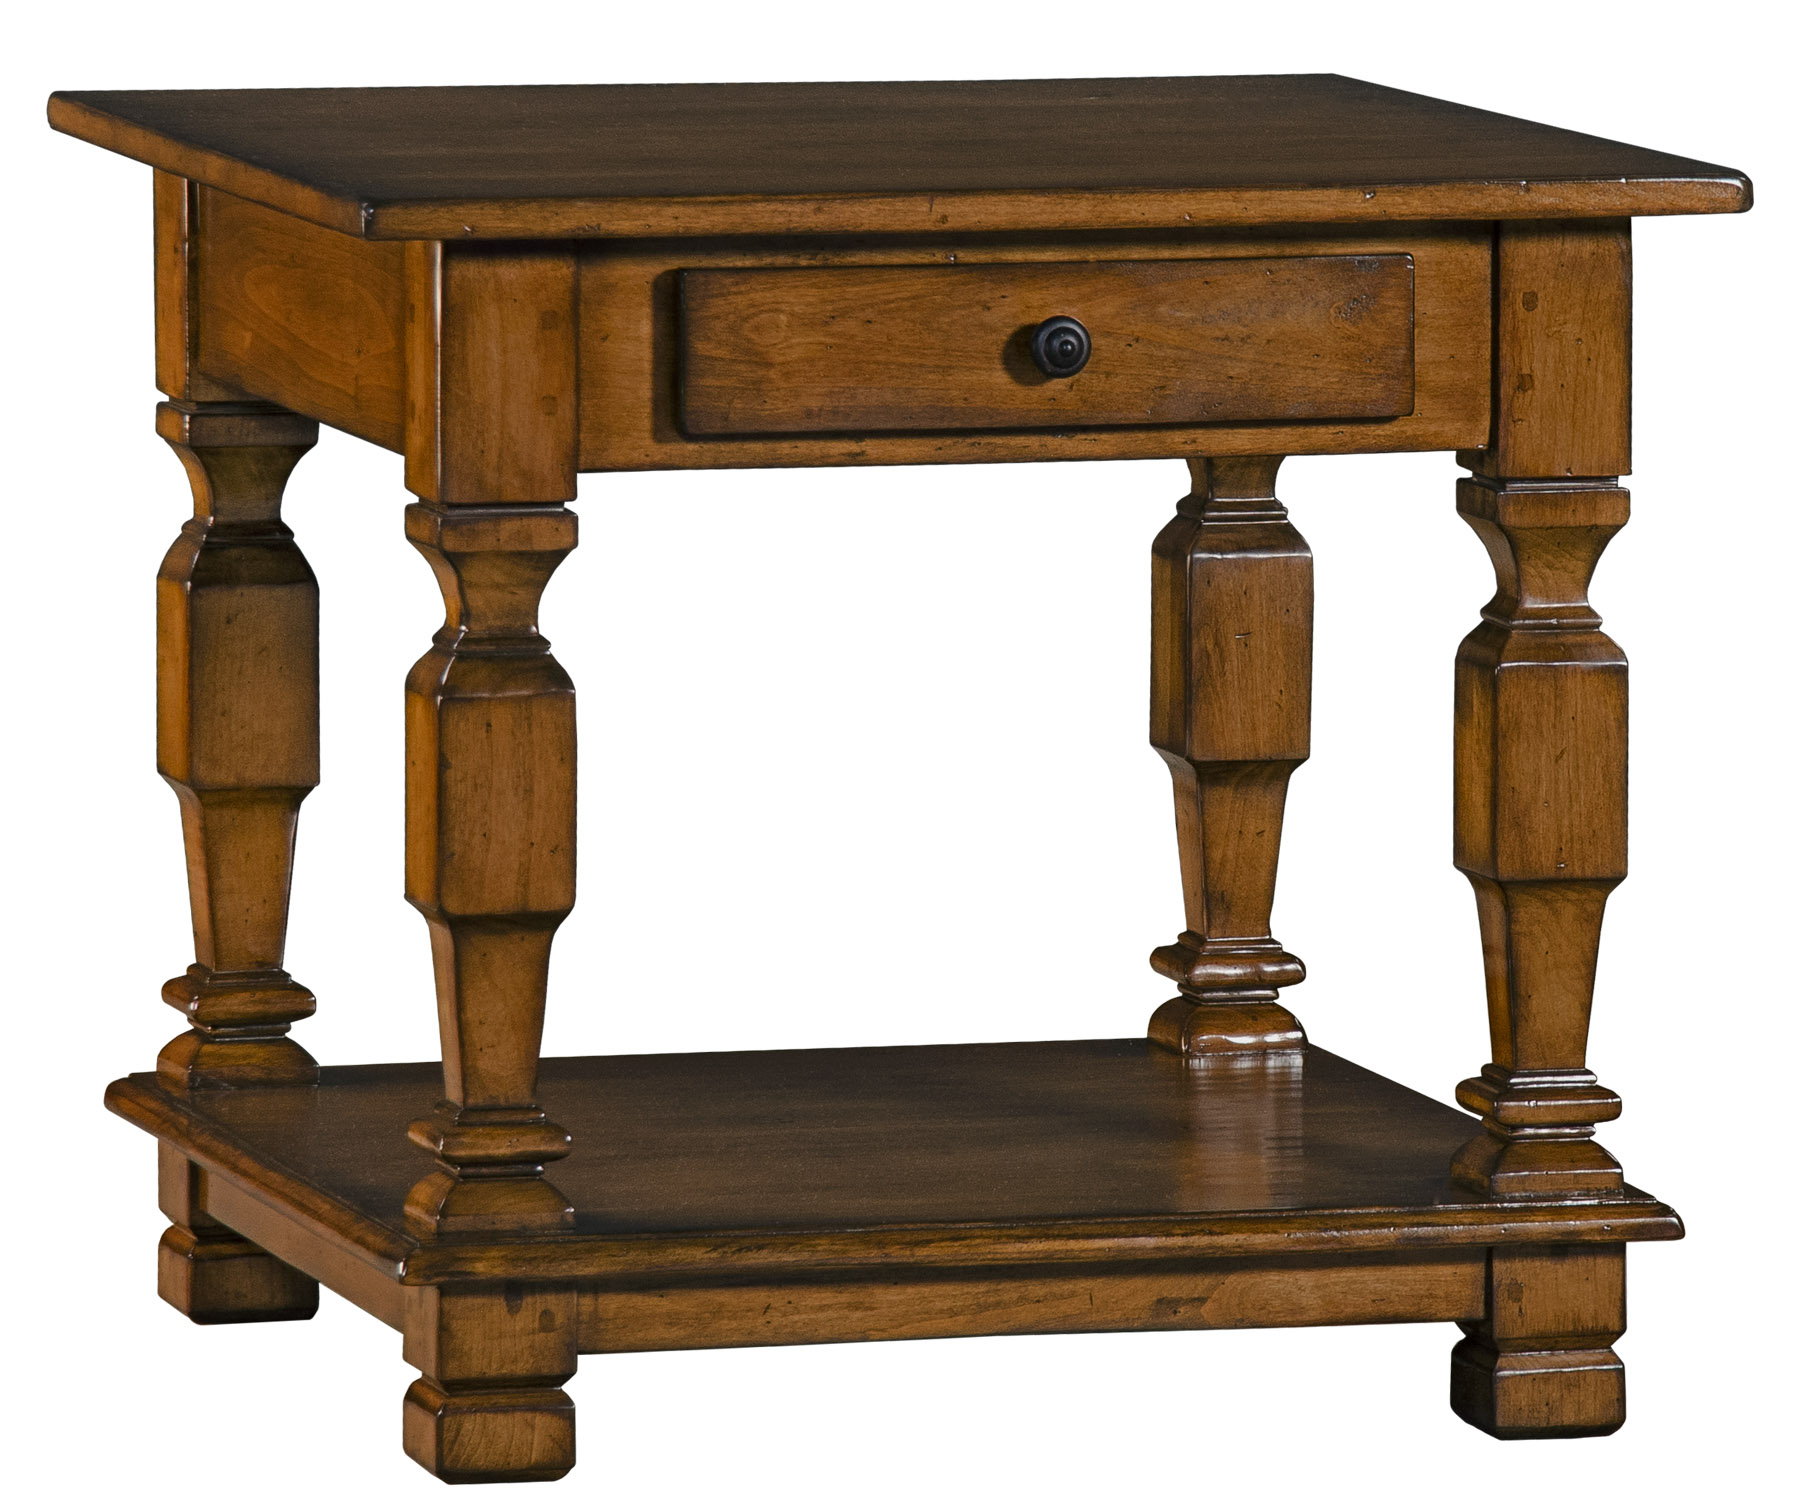 Barnaby traditional side or end table with bottom shelf by Woodland furniture in Idaho Falls